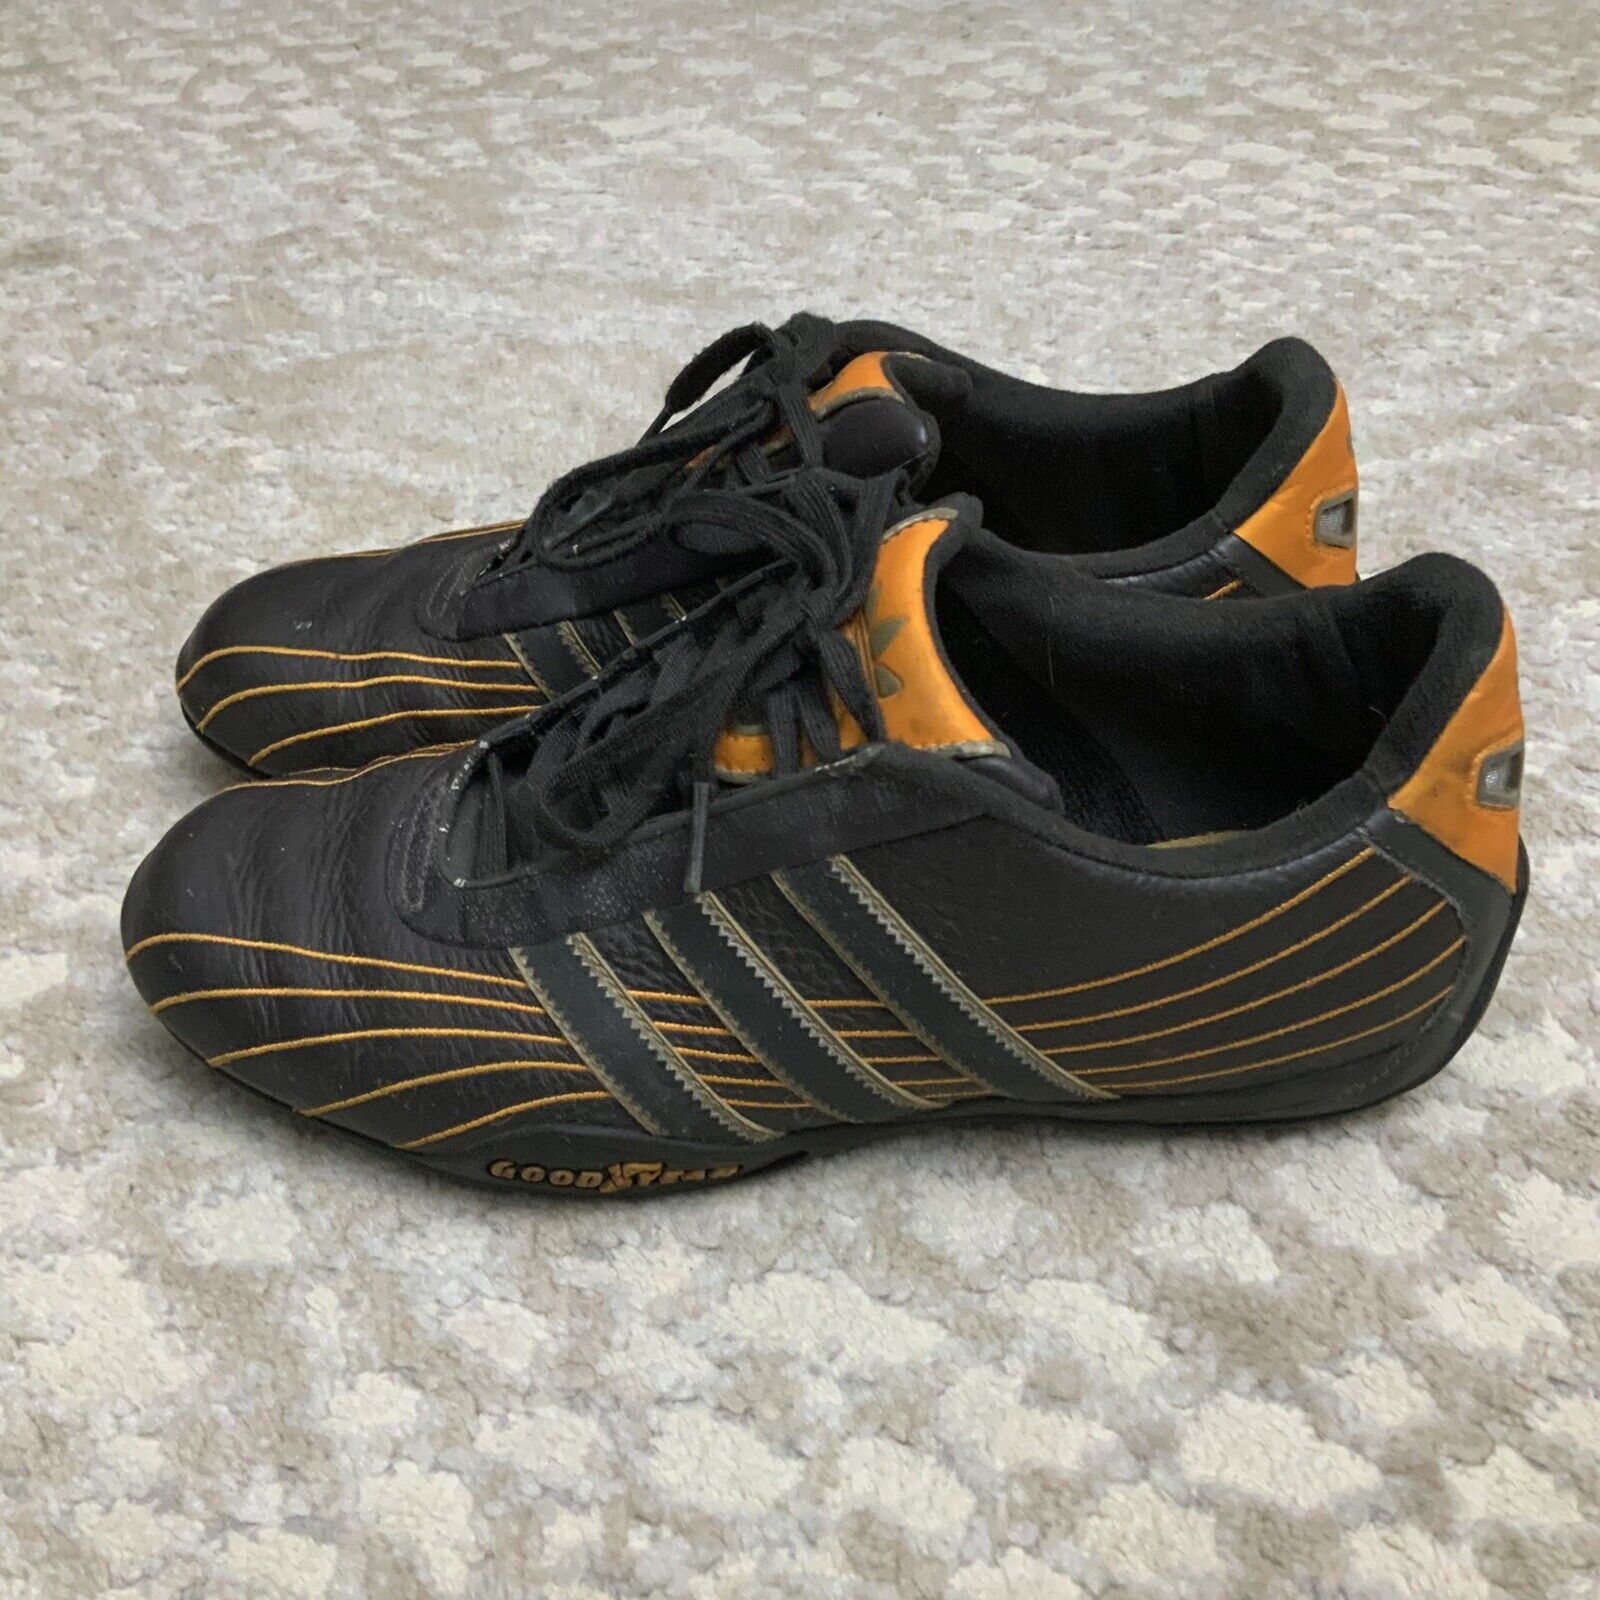 Adidas Goodyear Driving Shoes Racing Sneakers VTG Brown Leather Men’s Size 8.5